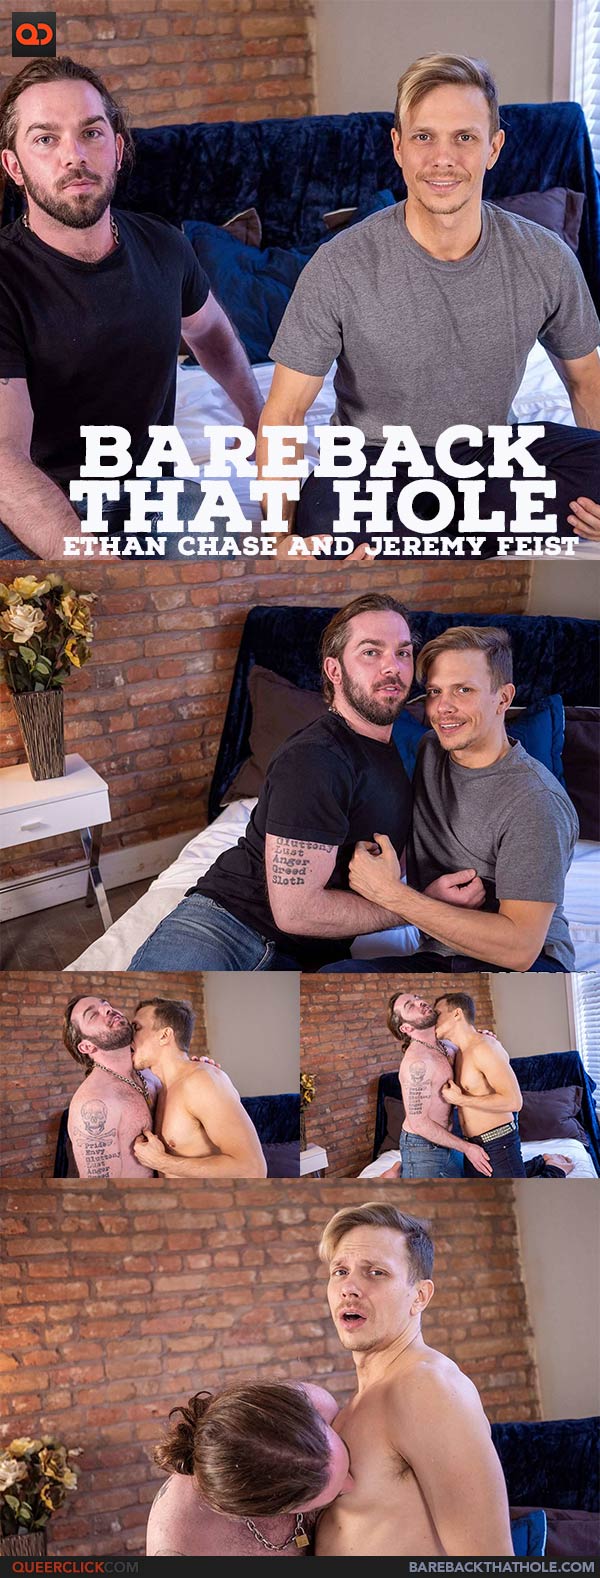 BarebackThatHole: Ethan Chase and Jeremy Feist - Place Your Bets